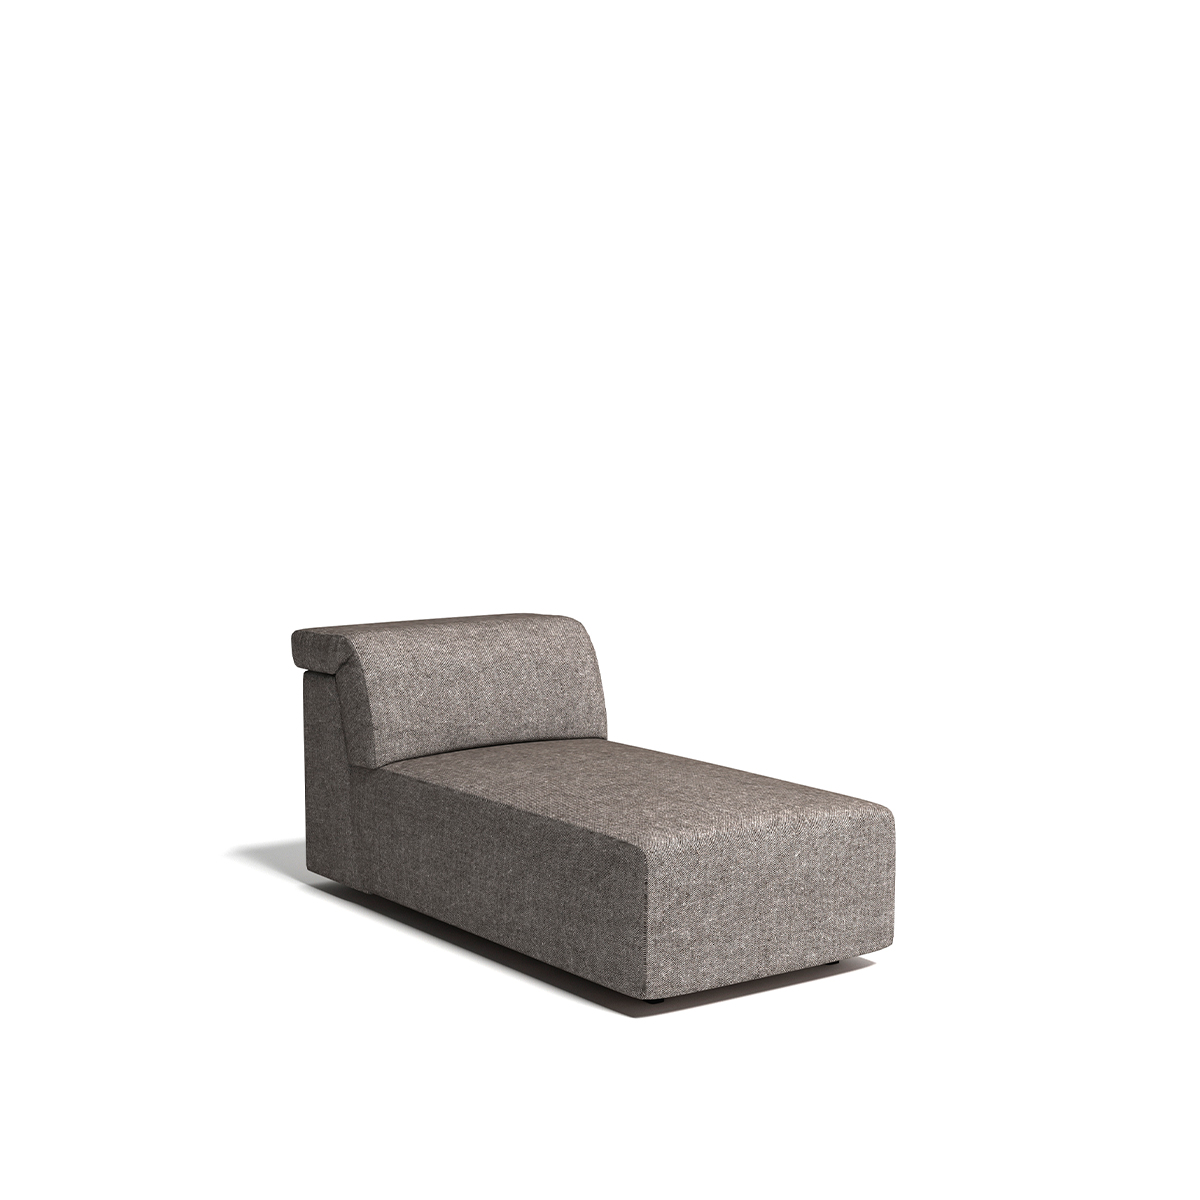 chaise longue without arms Cosmopol Relax